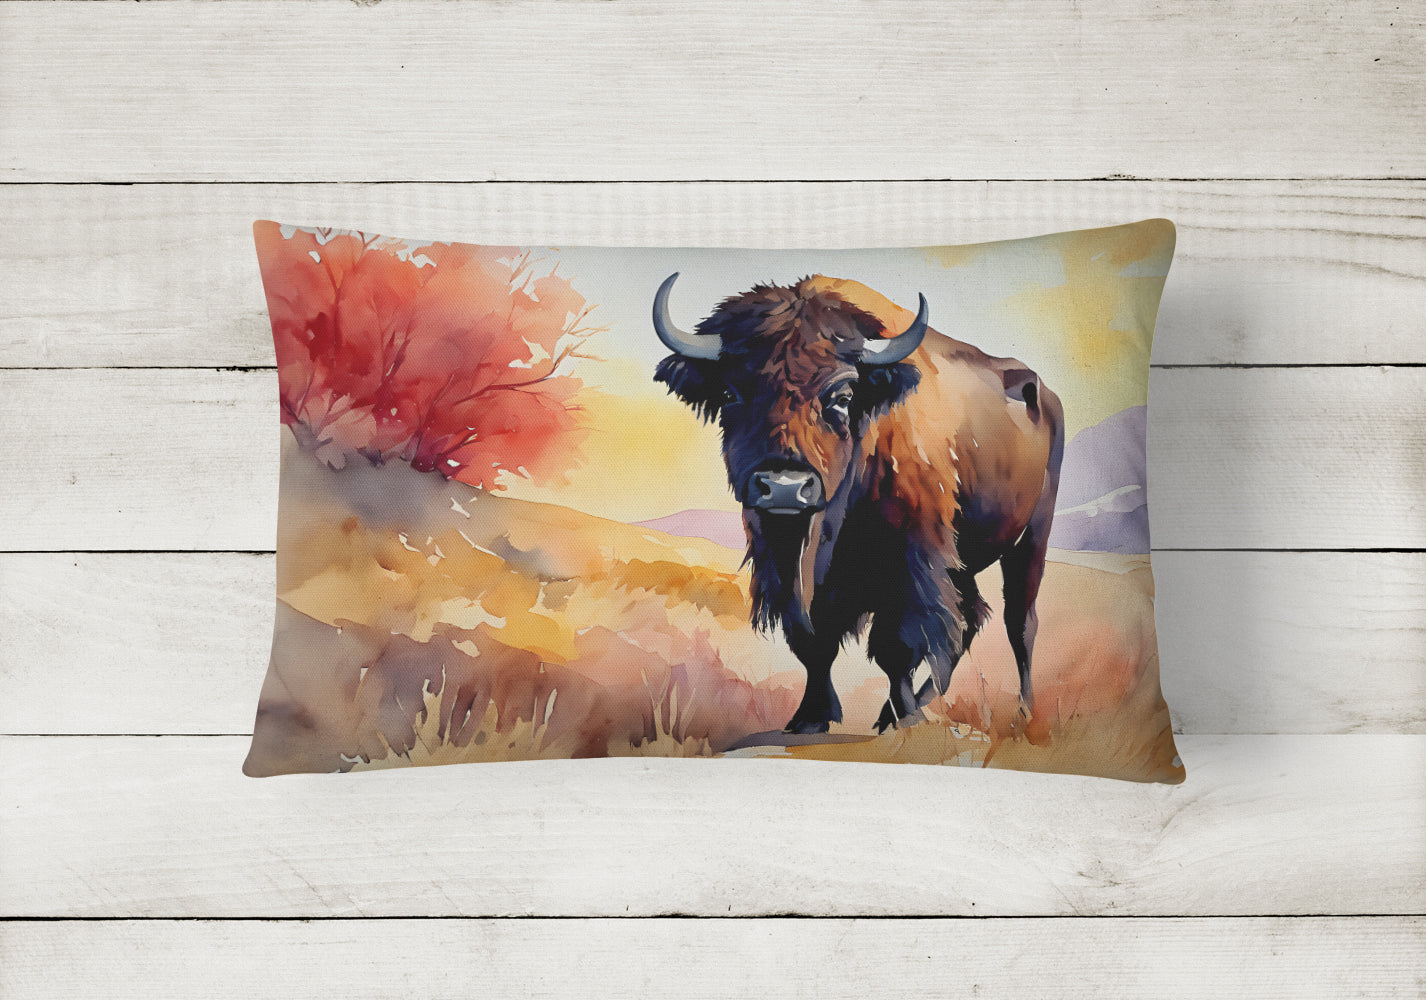 American Bison Throw Pillow